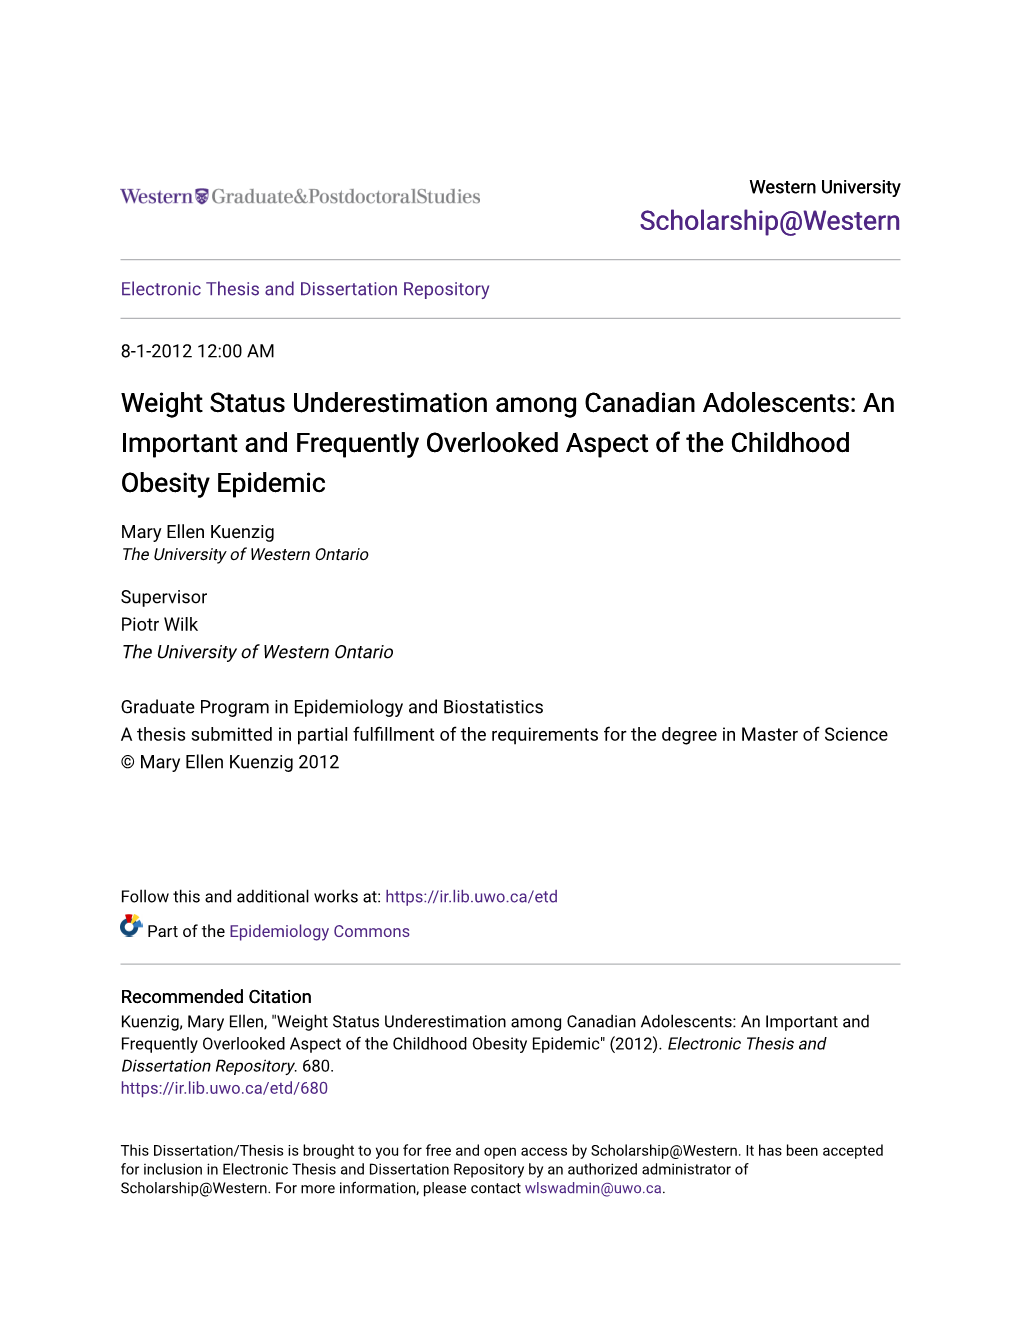 Weight Status Underestimation Among Canadian Adolescents: an Important and Frequently Overlooked Aspect of the Childhood Obesity Epidemic